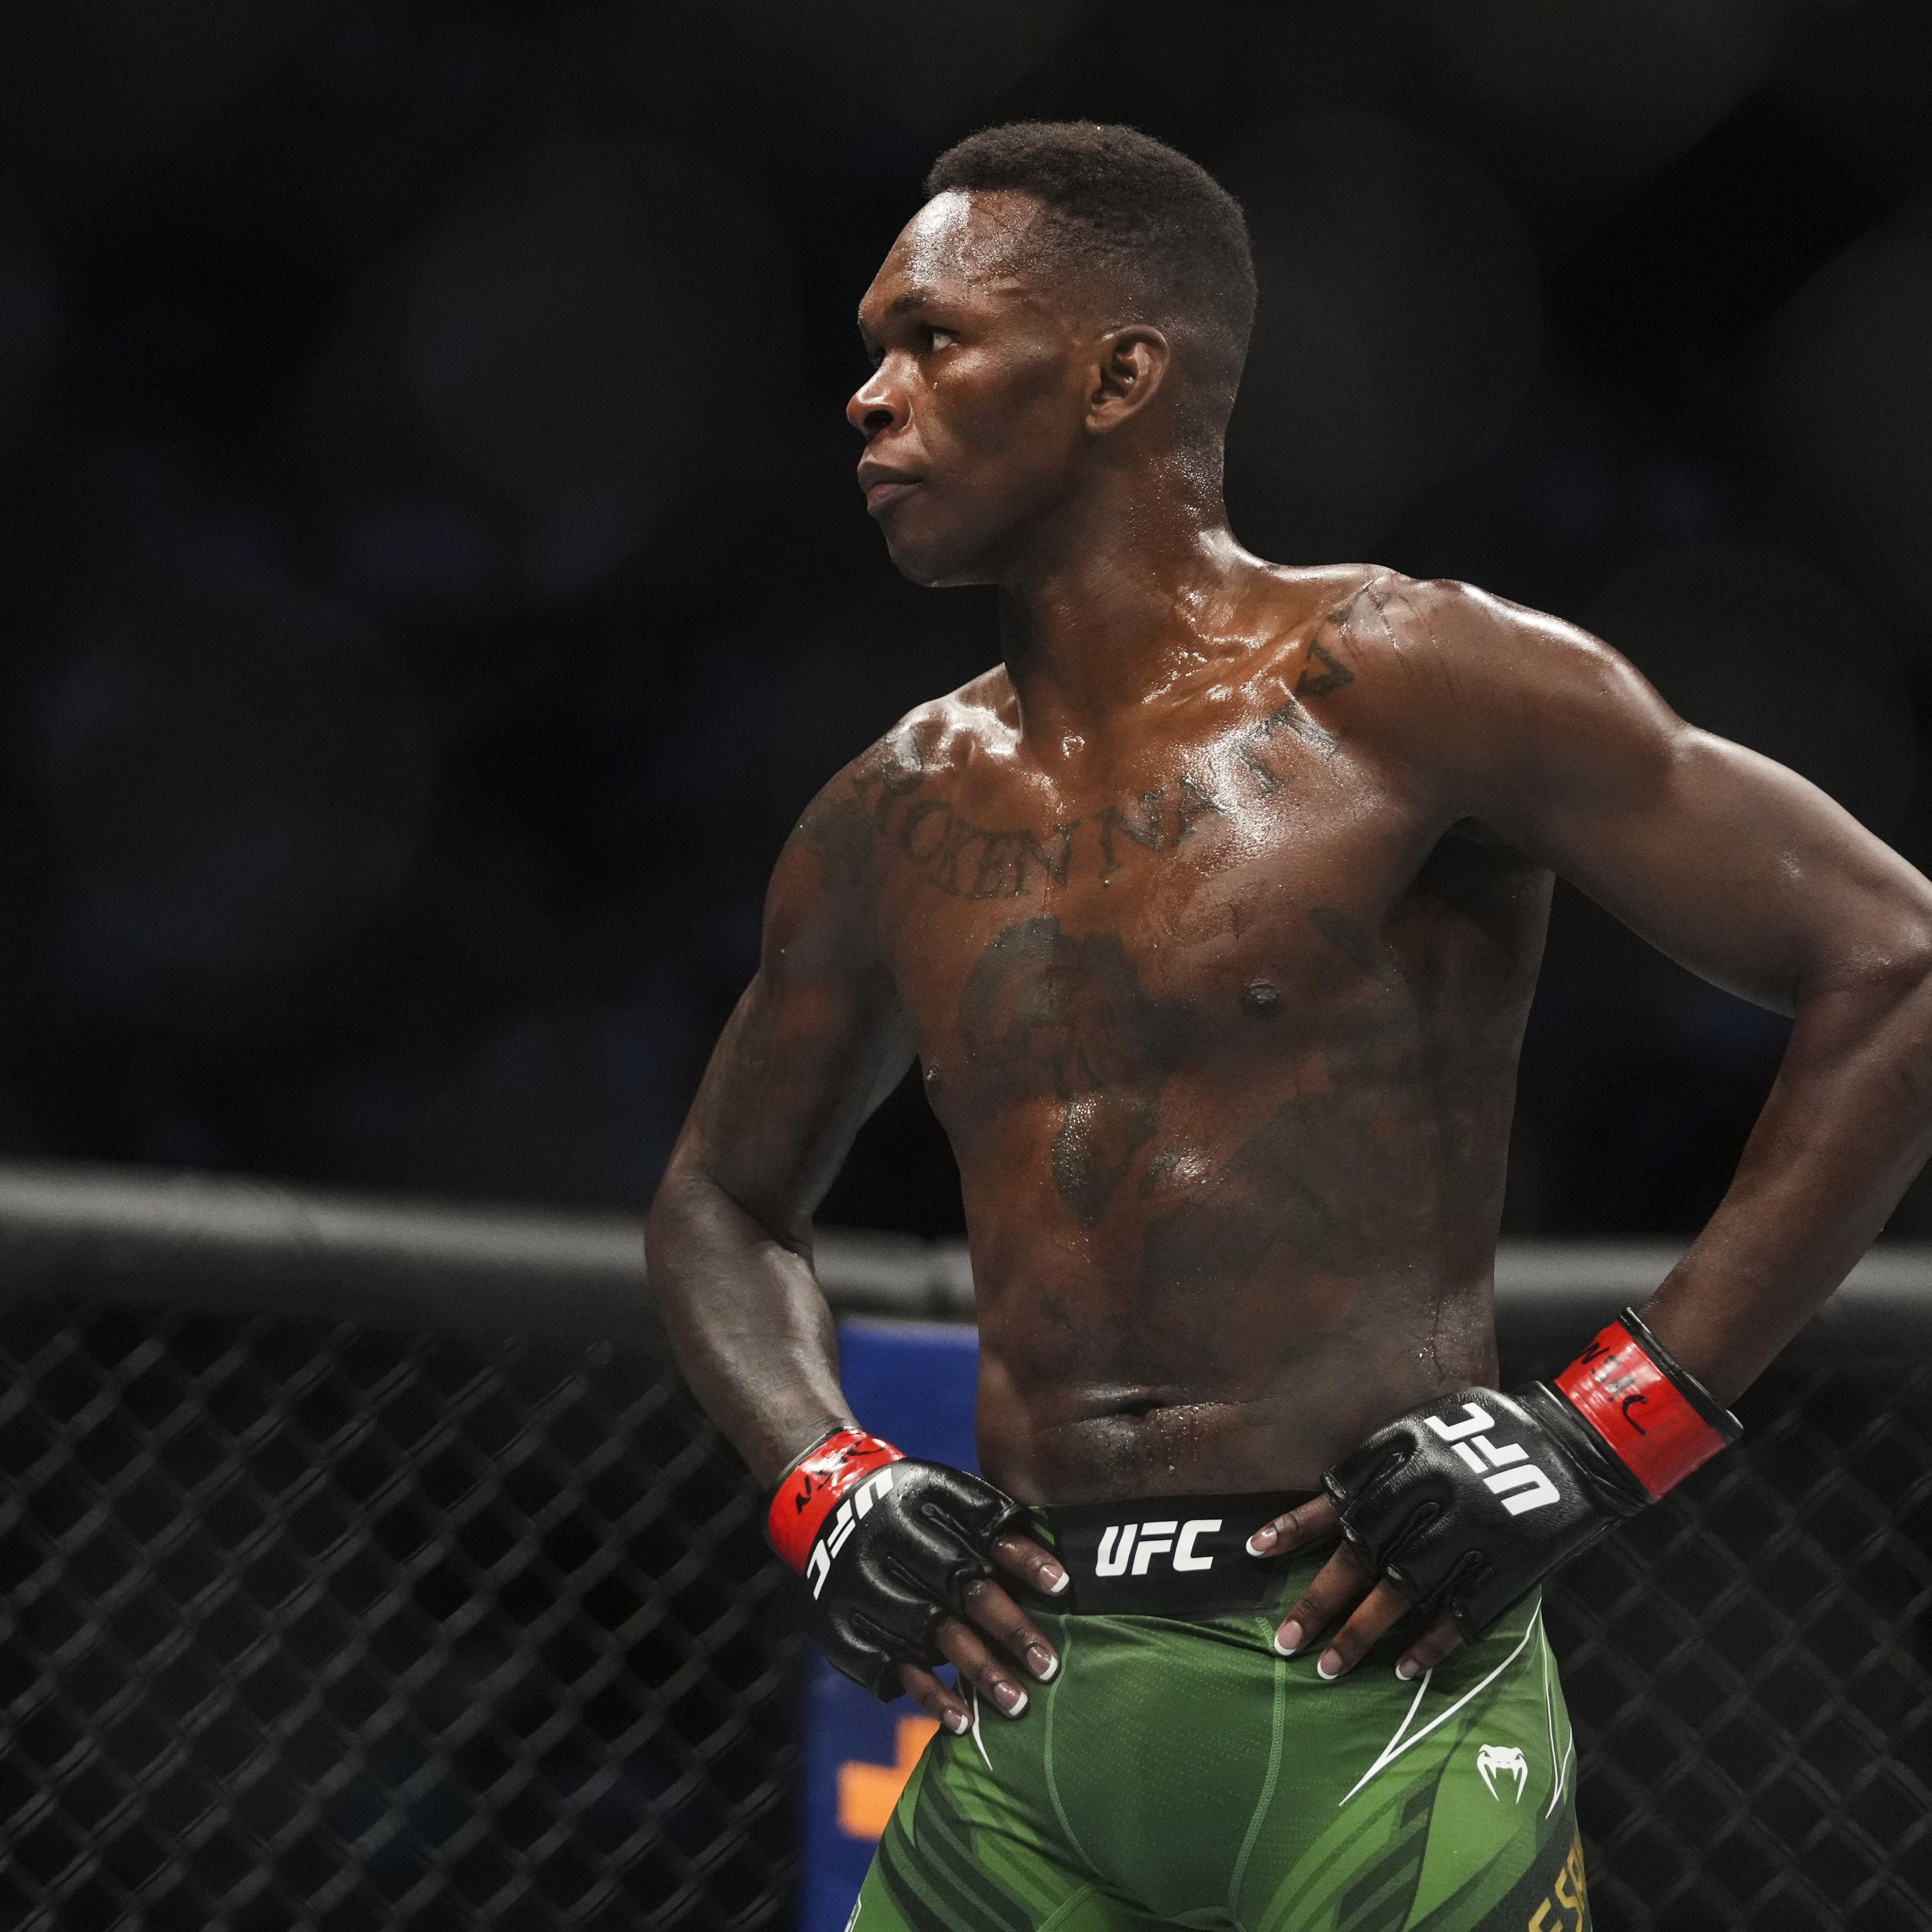 Israel Adesanya Wins Again at UFC 276, but New Challenger Has Emerged For His Title - Bleacher Report : In 12 tries, no MMA middleweight has been able to defeat Israel Adesanya. Luckily for fans and maybe unluckily for Adesanya, then, is that a kickboxer was able...  | Tranquility 國際社群